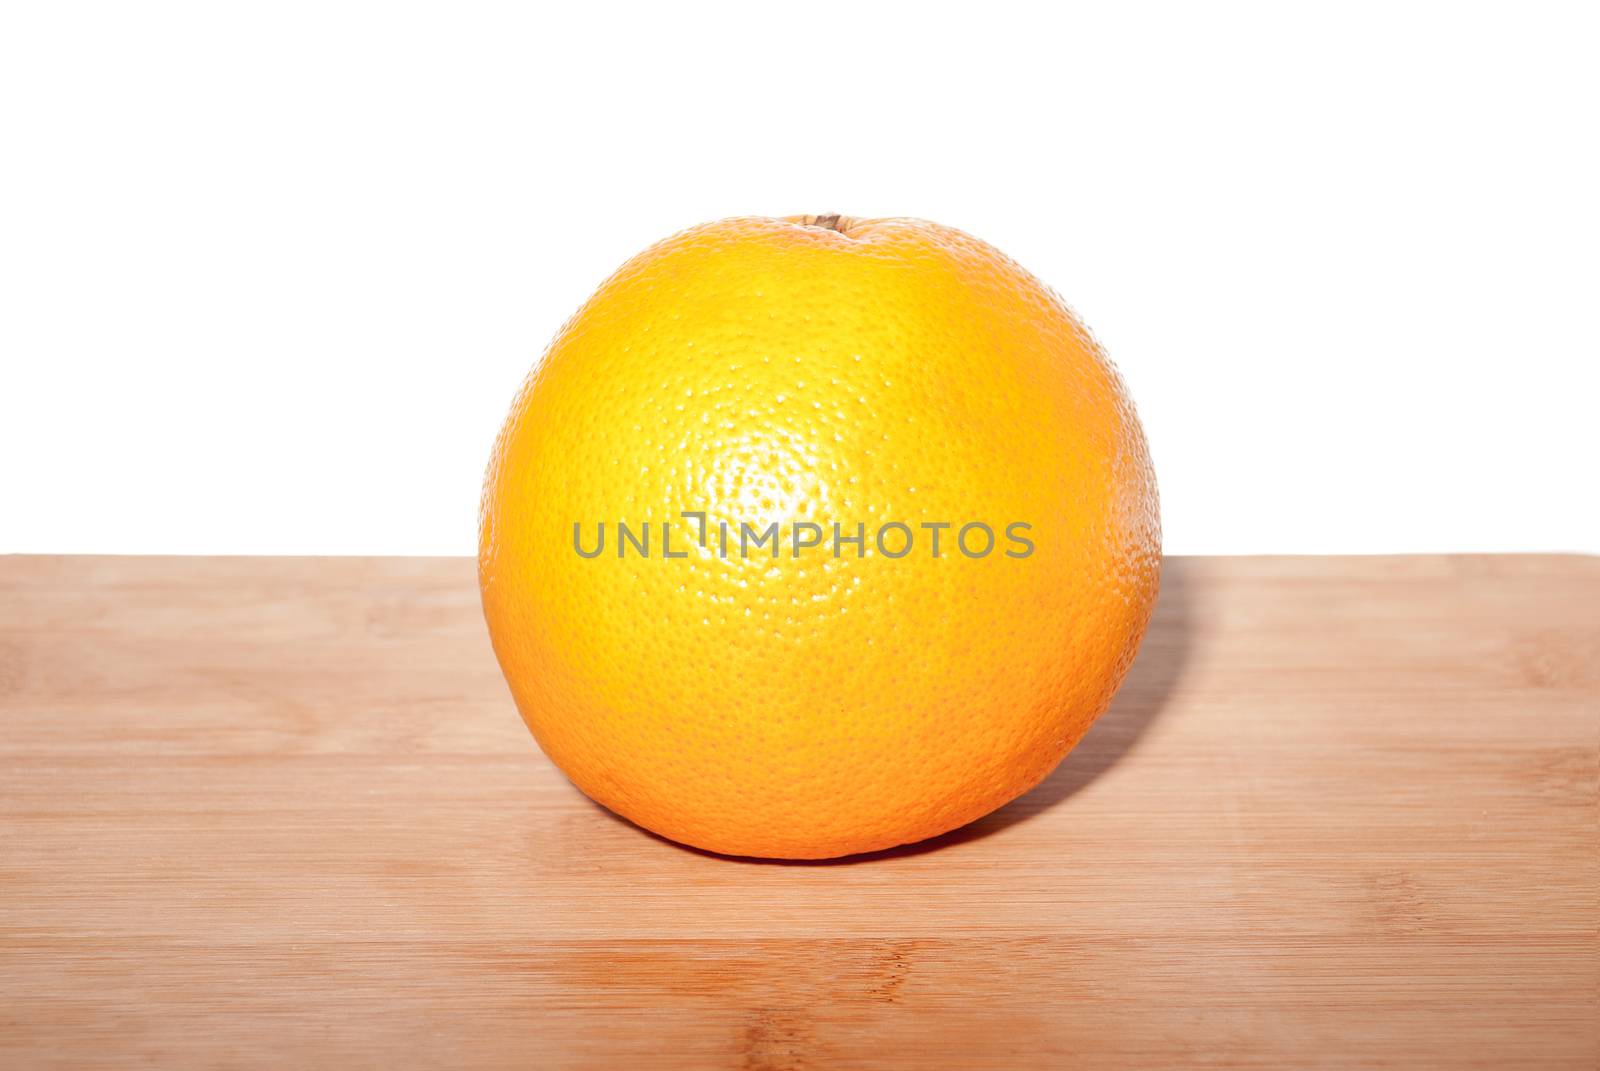 Ripe grapefruit on a wooden board with white back background.